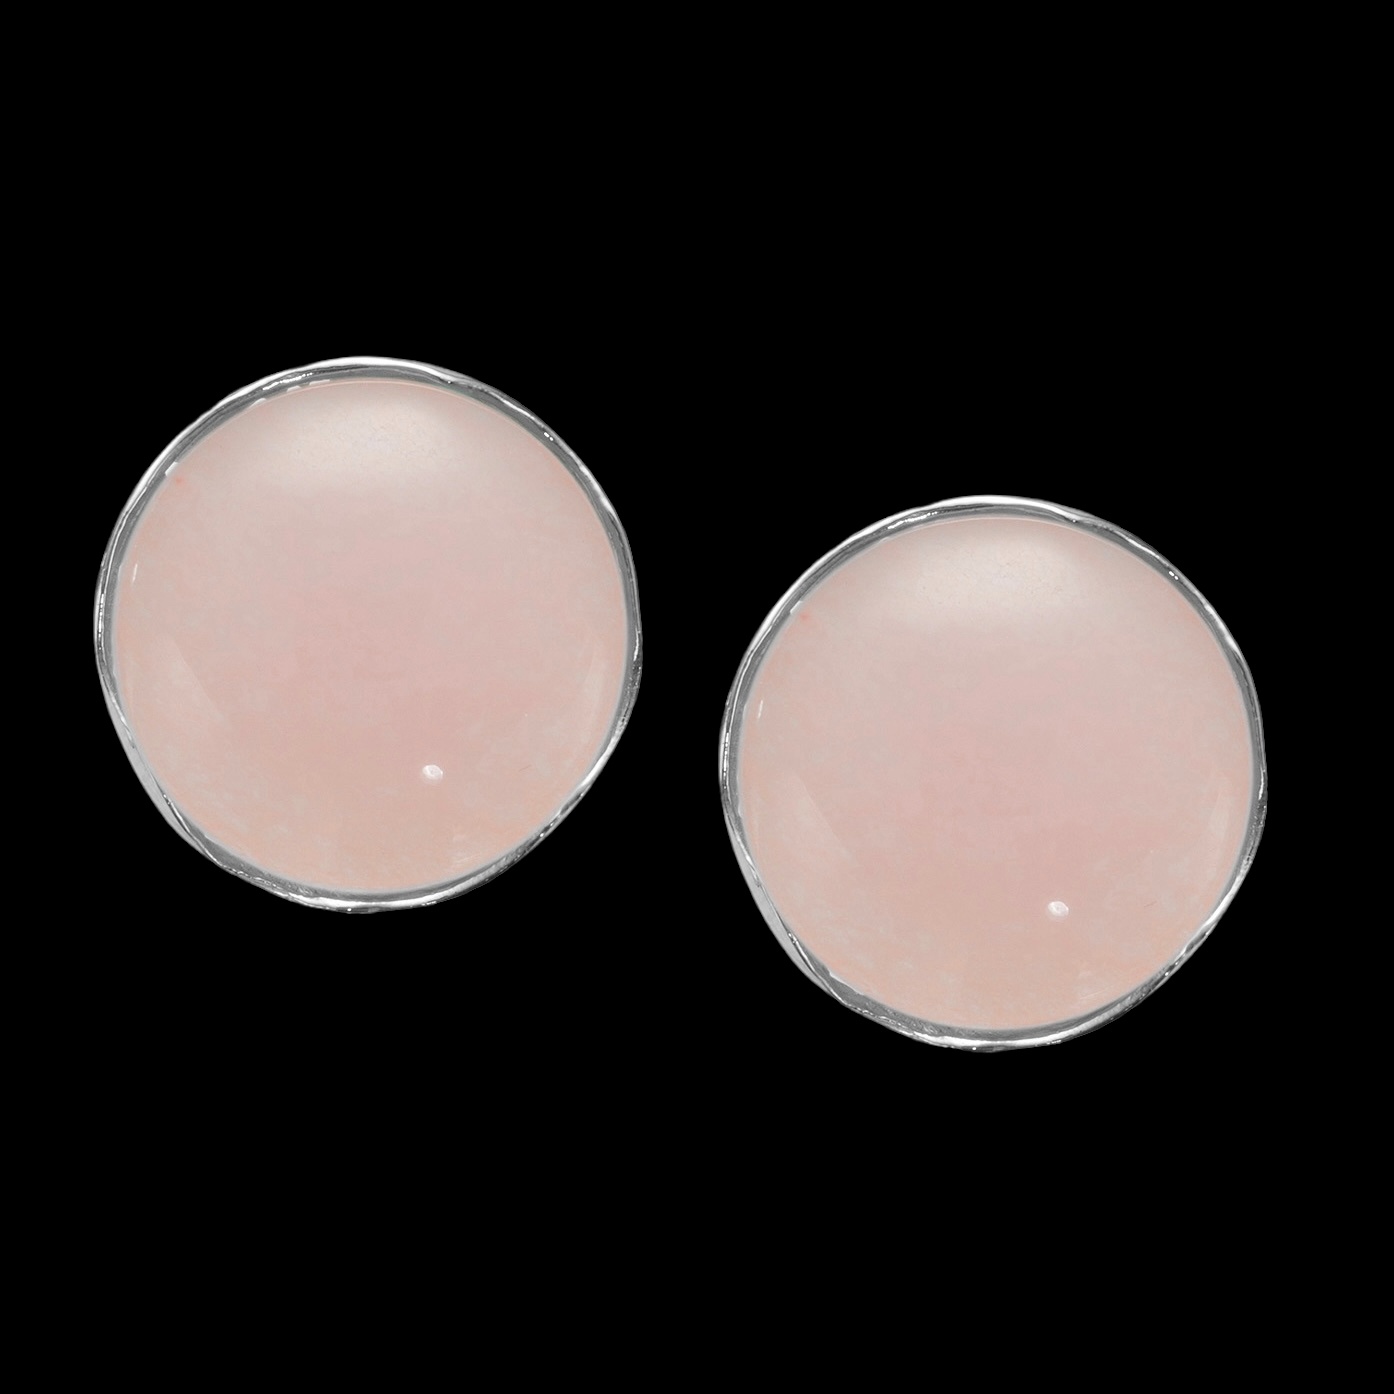 Silver round earrings with a pink quartz stone